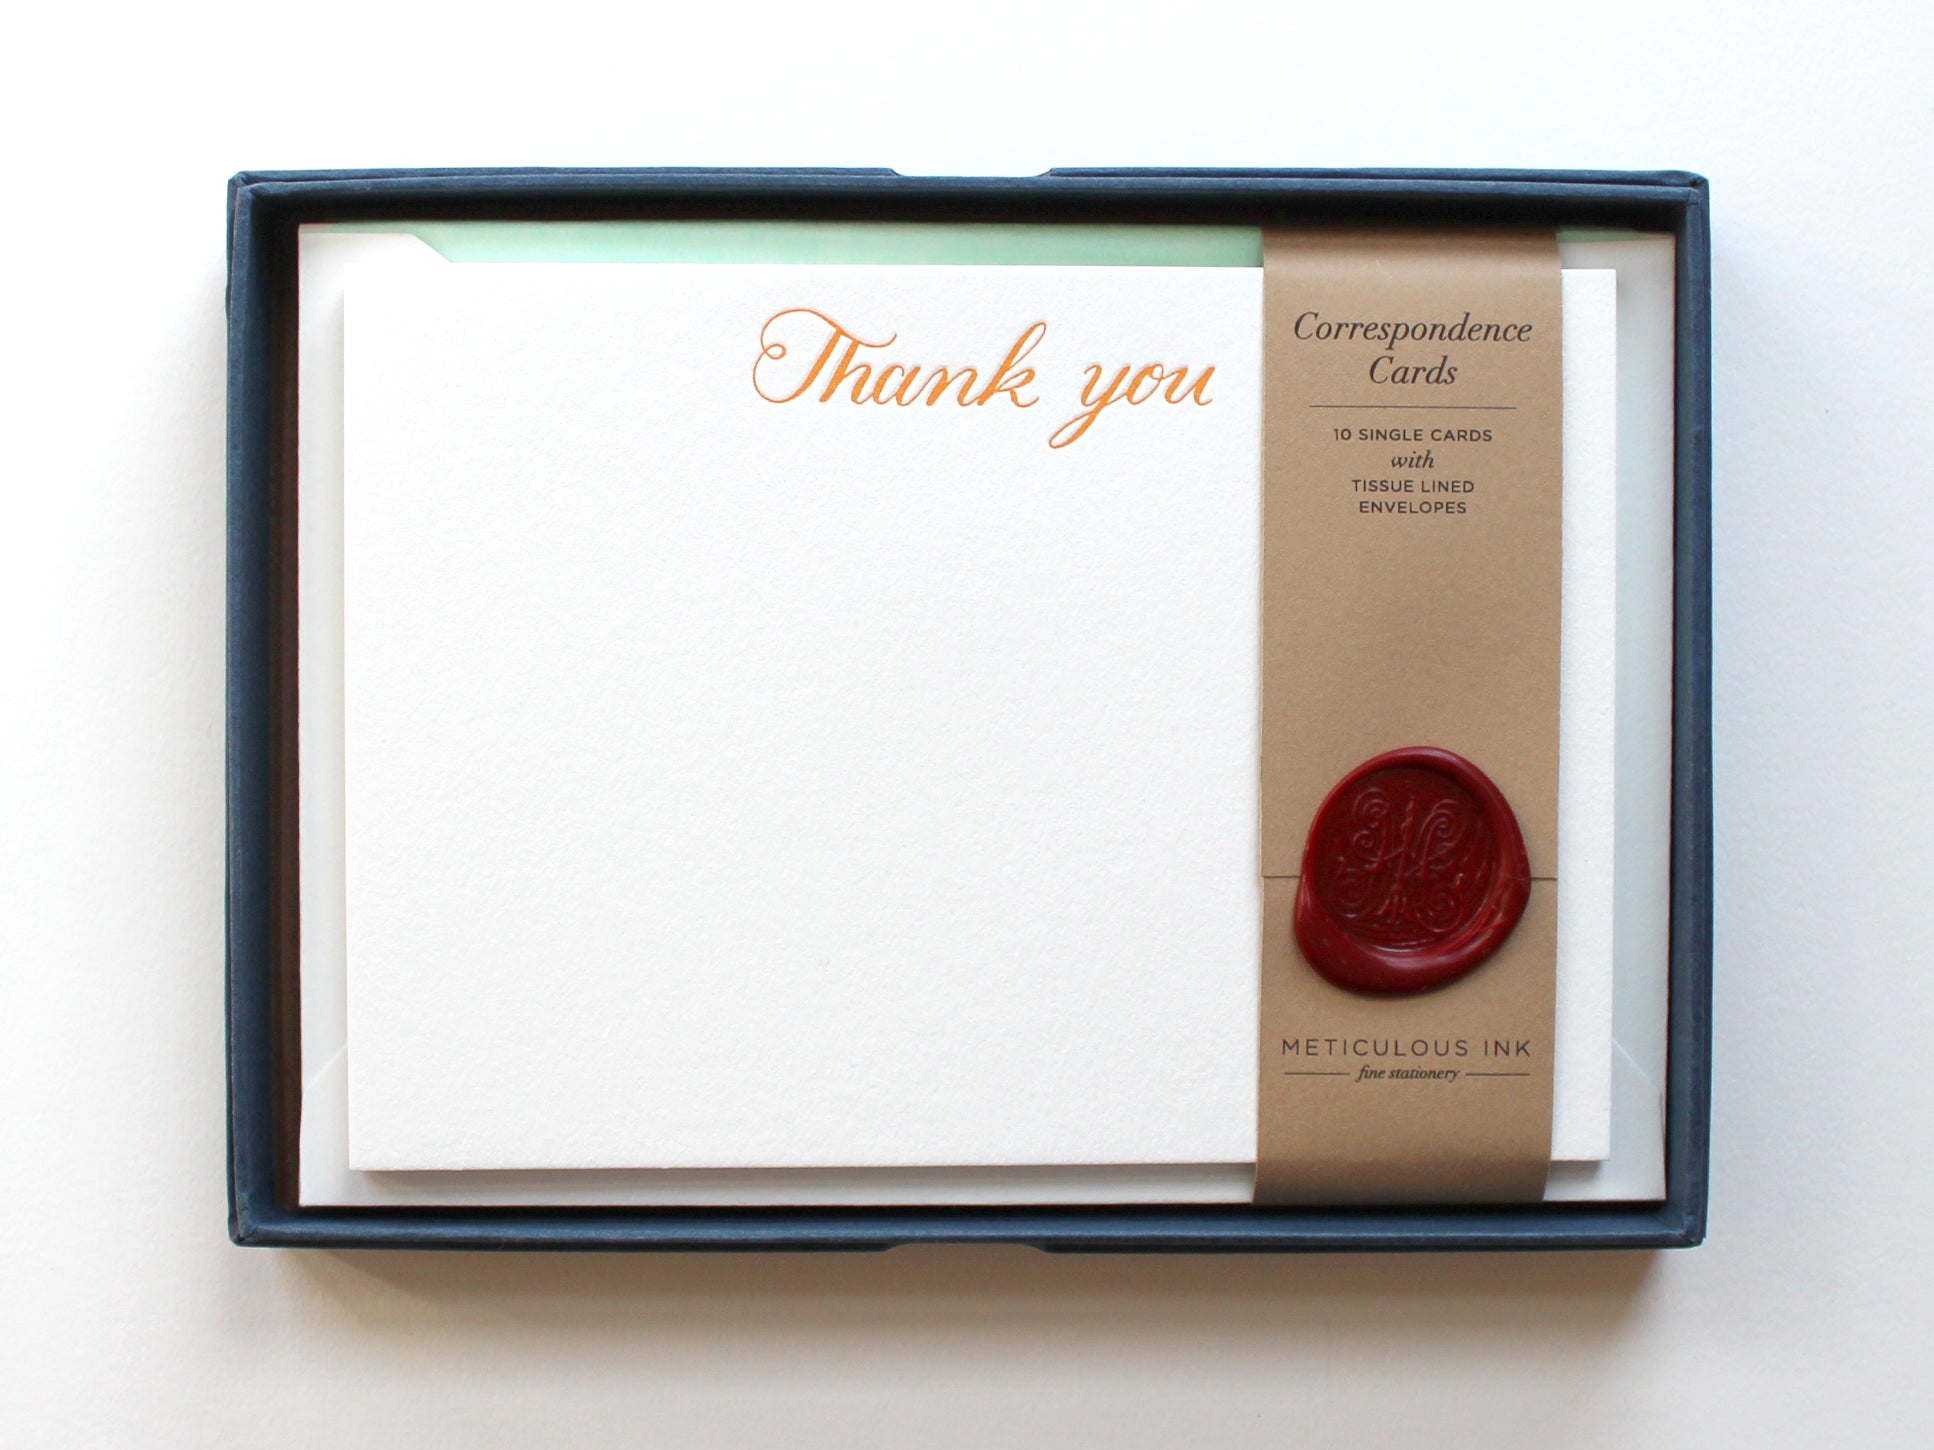 Orange Script Thank You Letterpress Correspondence Cards in display box with wax seal